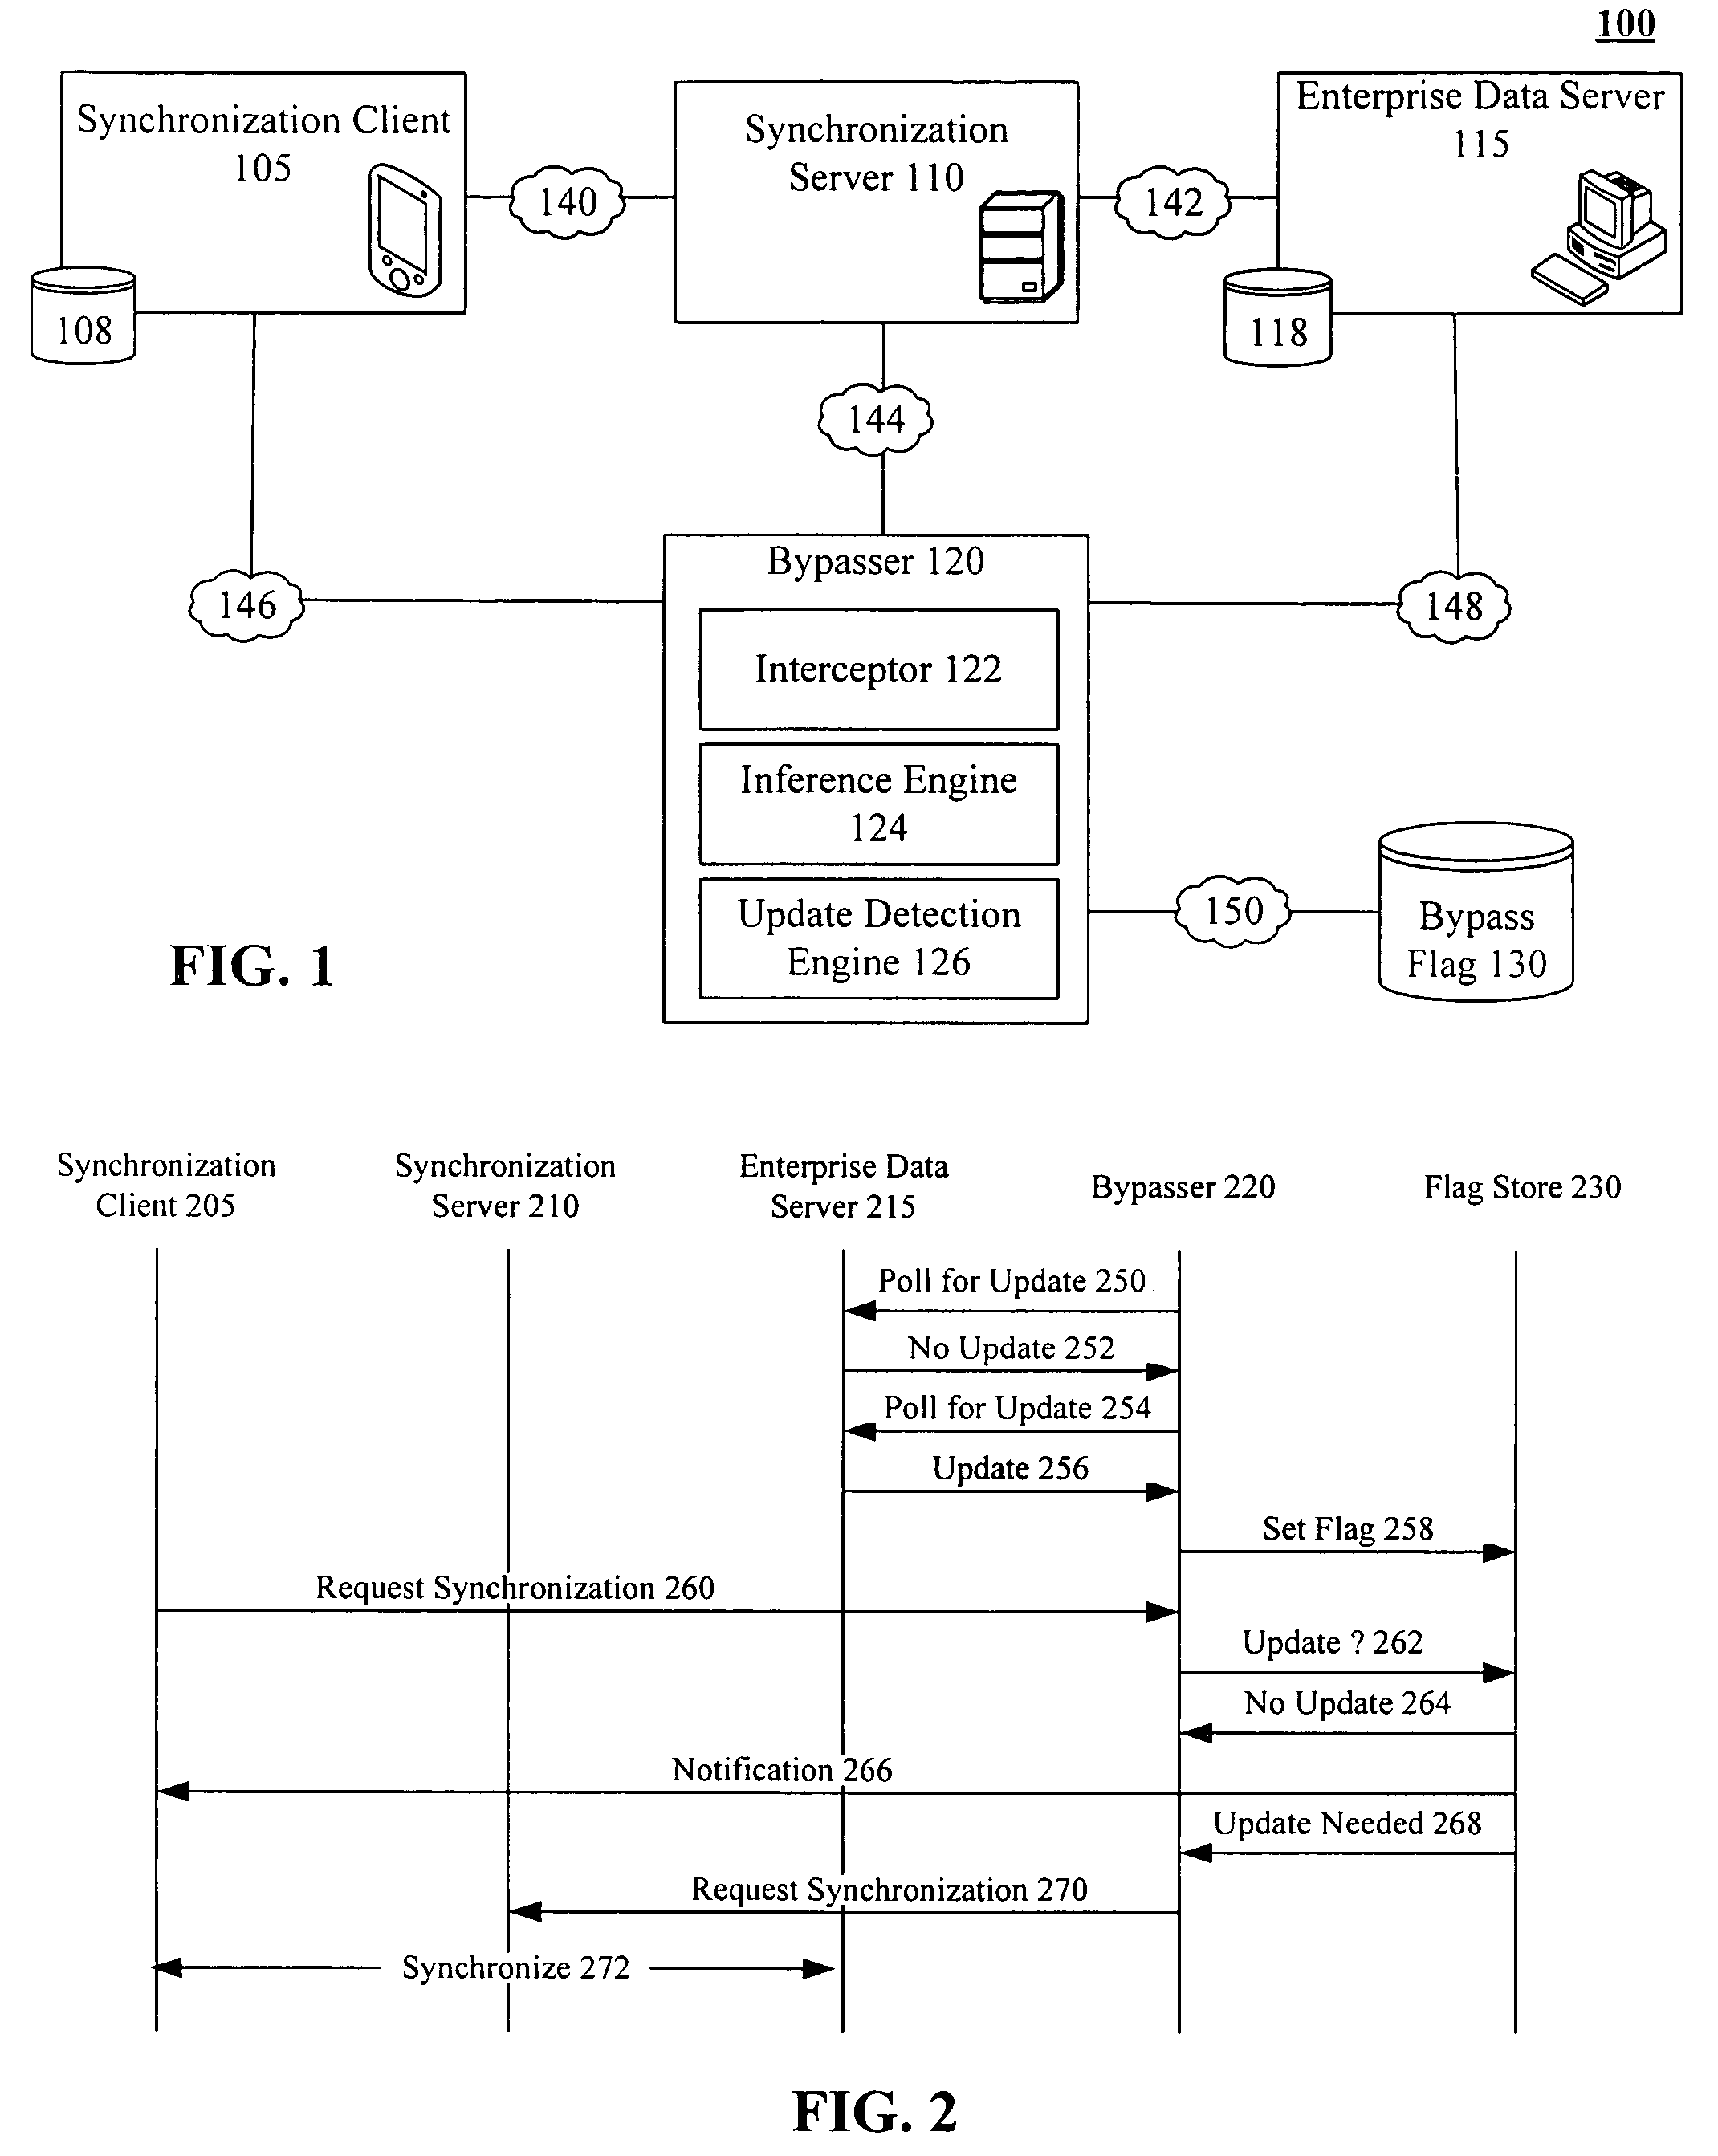 Bypassing an intermediate synchronization server of a three tiered synchronization system